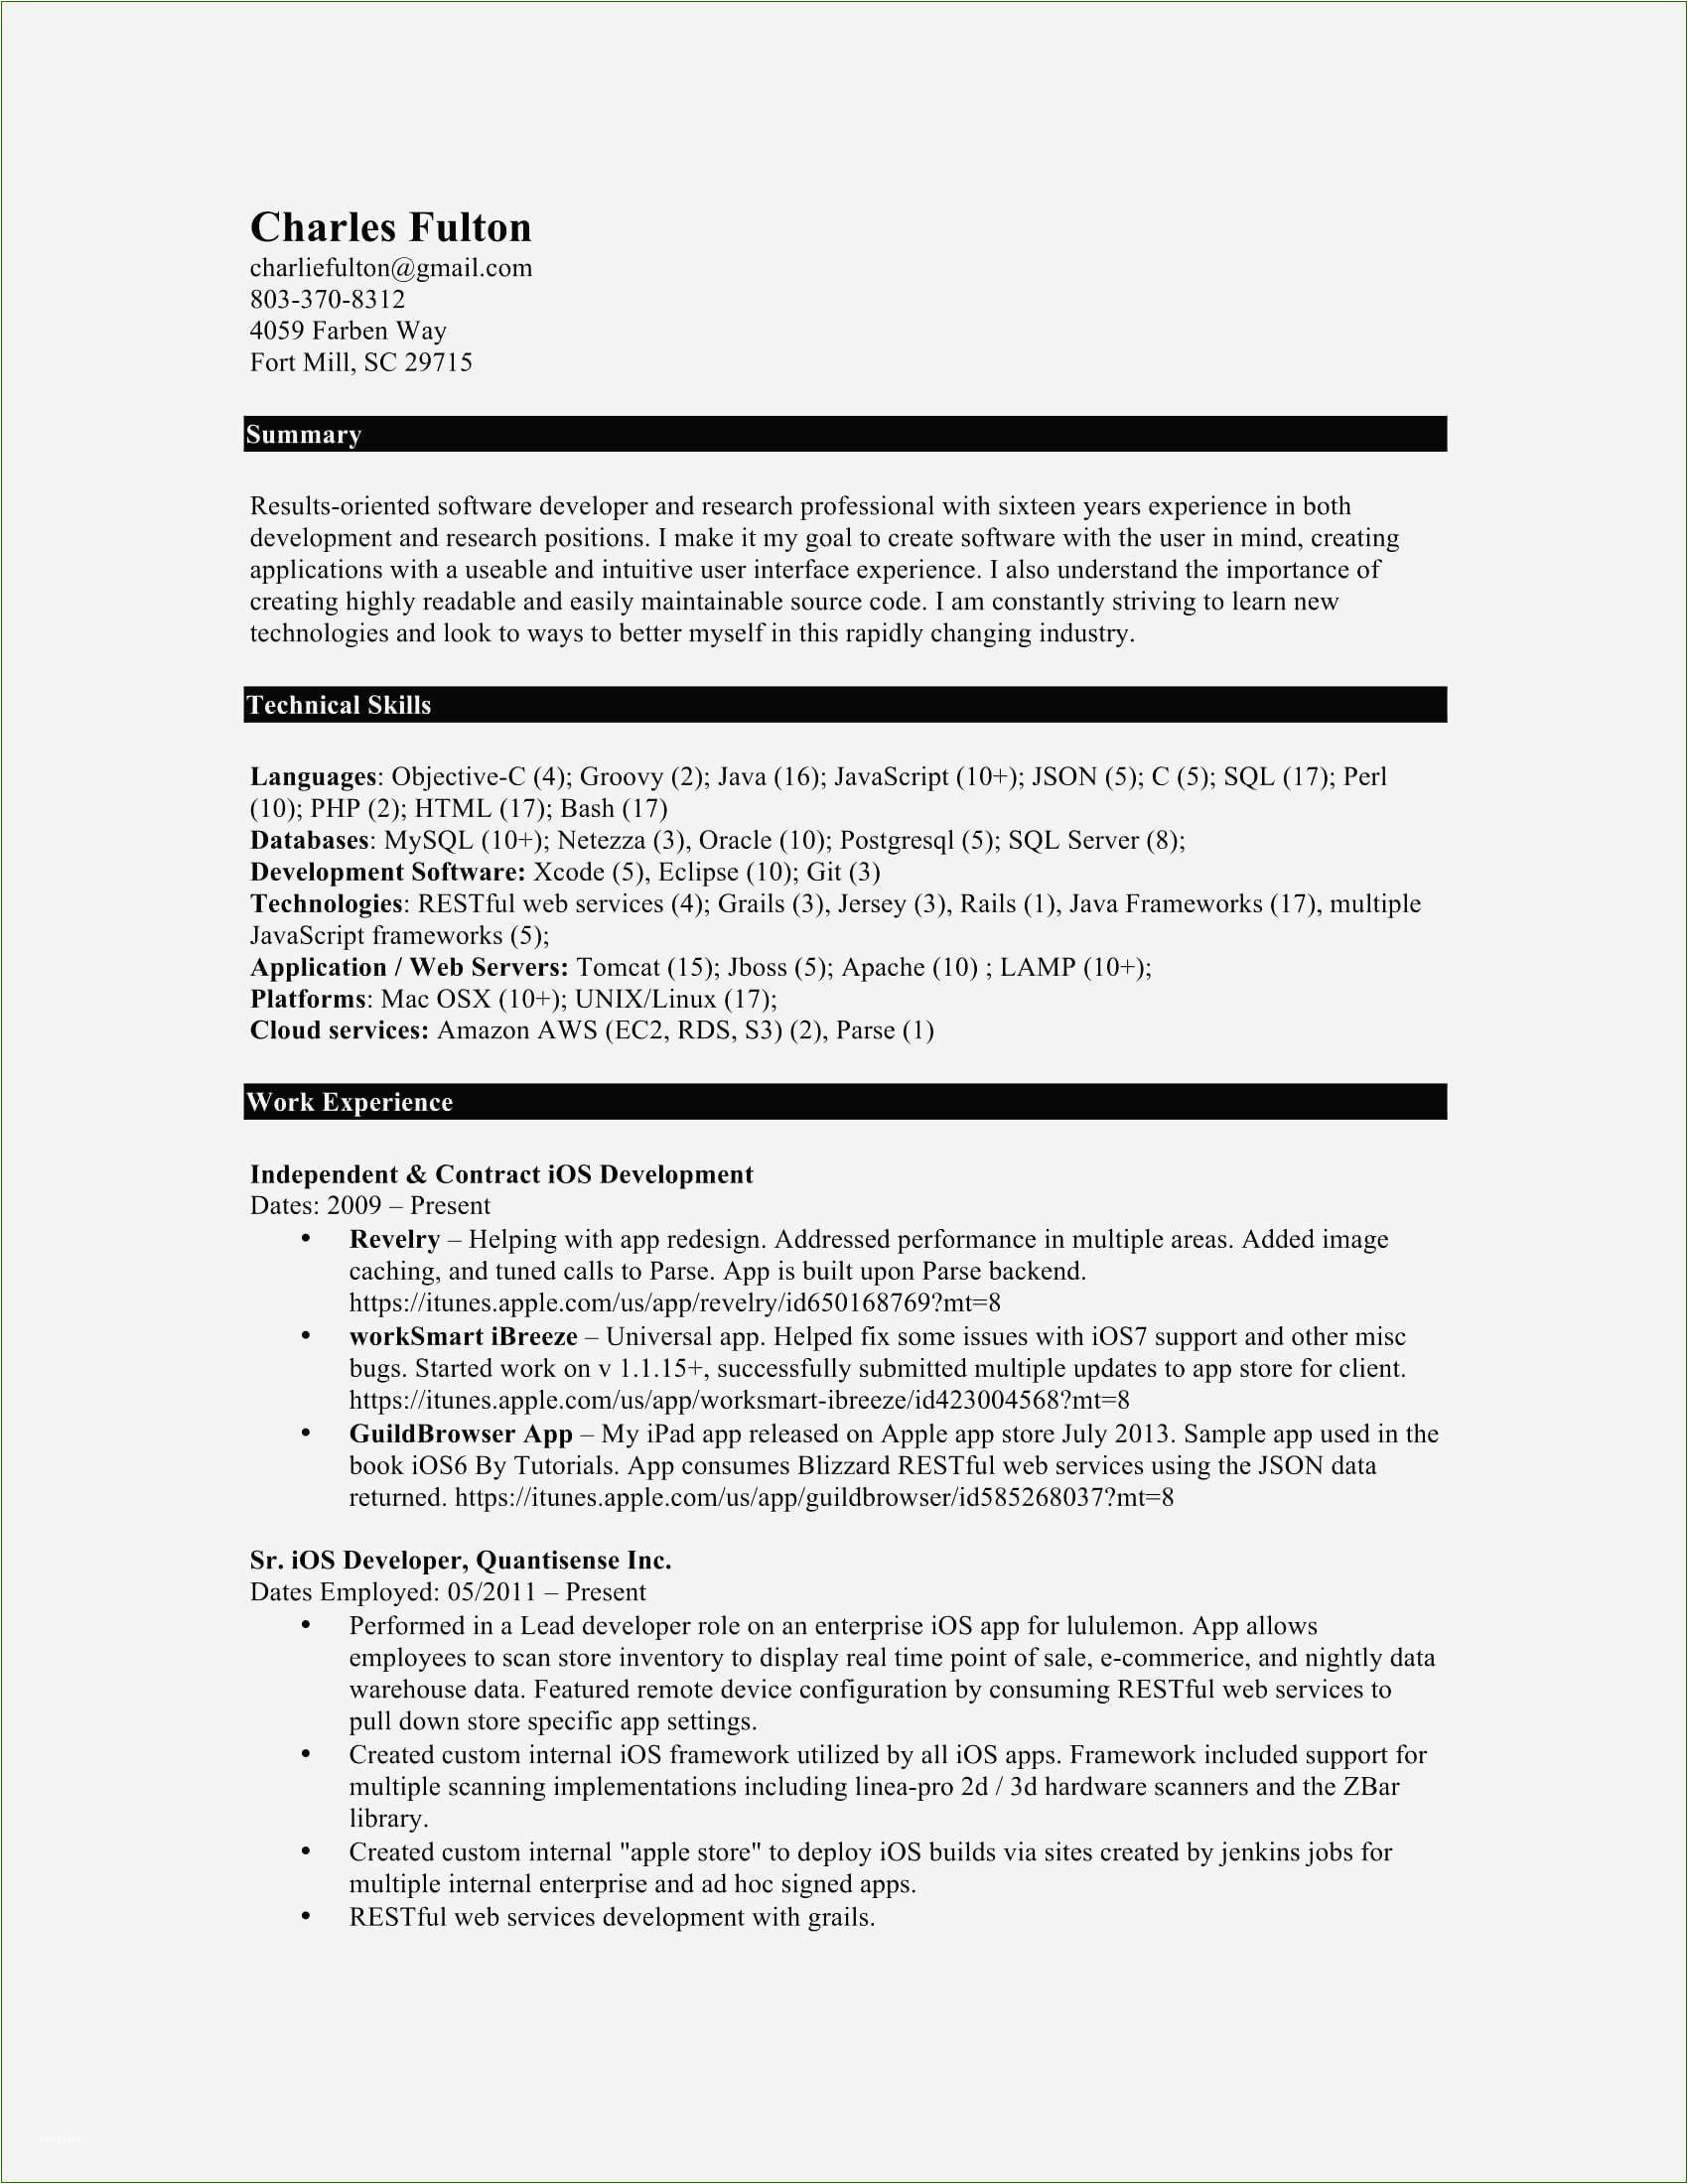 Resume Template for 10 Years Experience 10 Years Experience software Engineer Resume